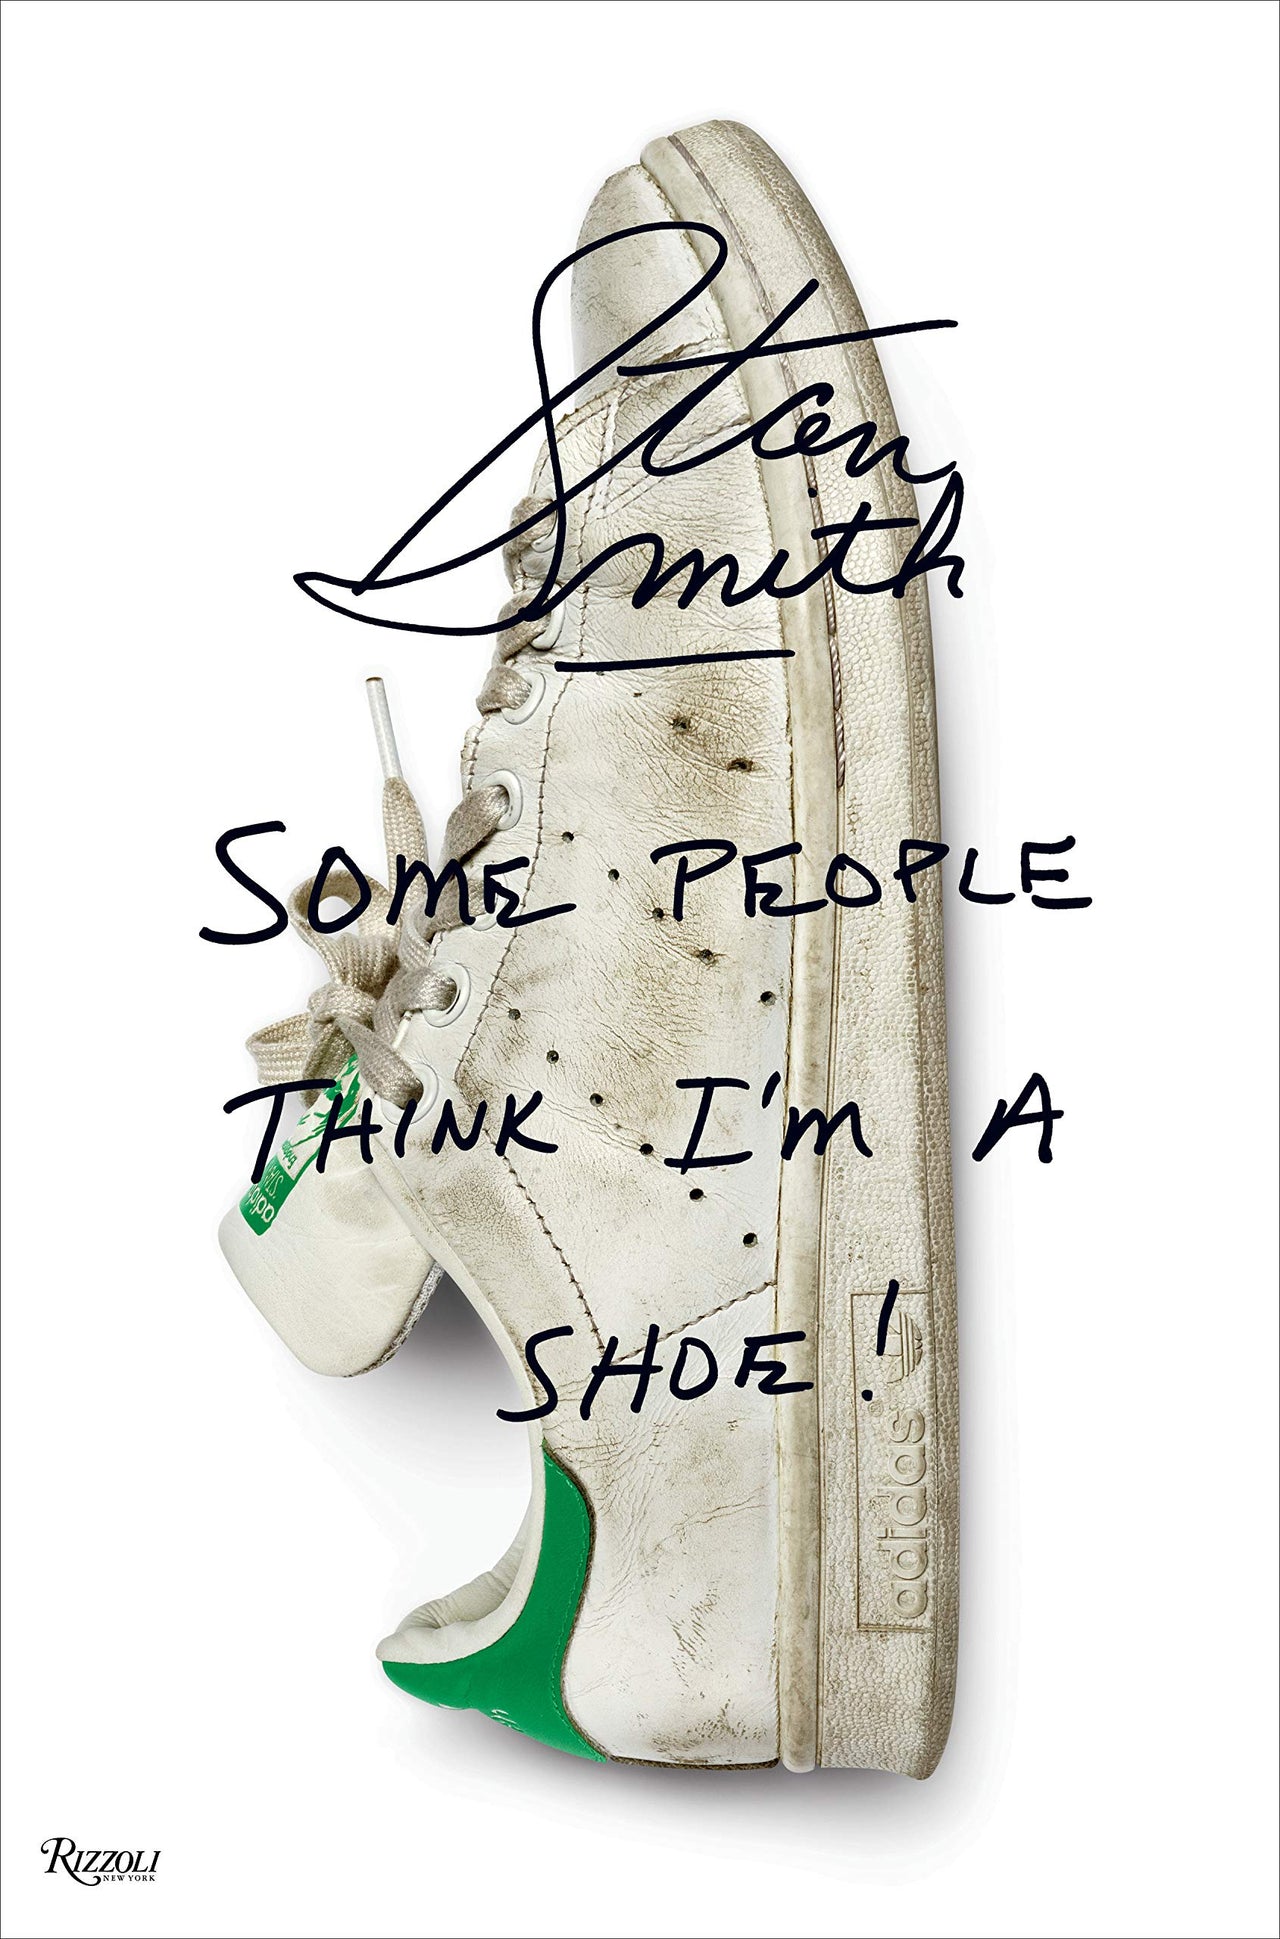 Stan Smith: Some People Think I'm A Shoe!